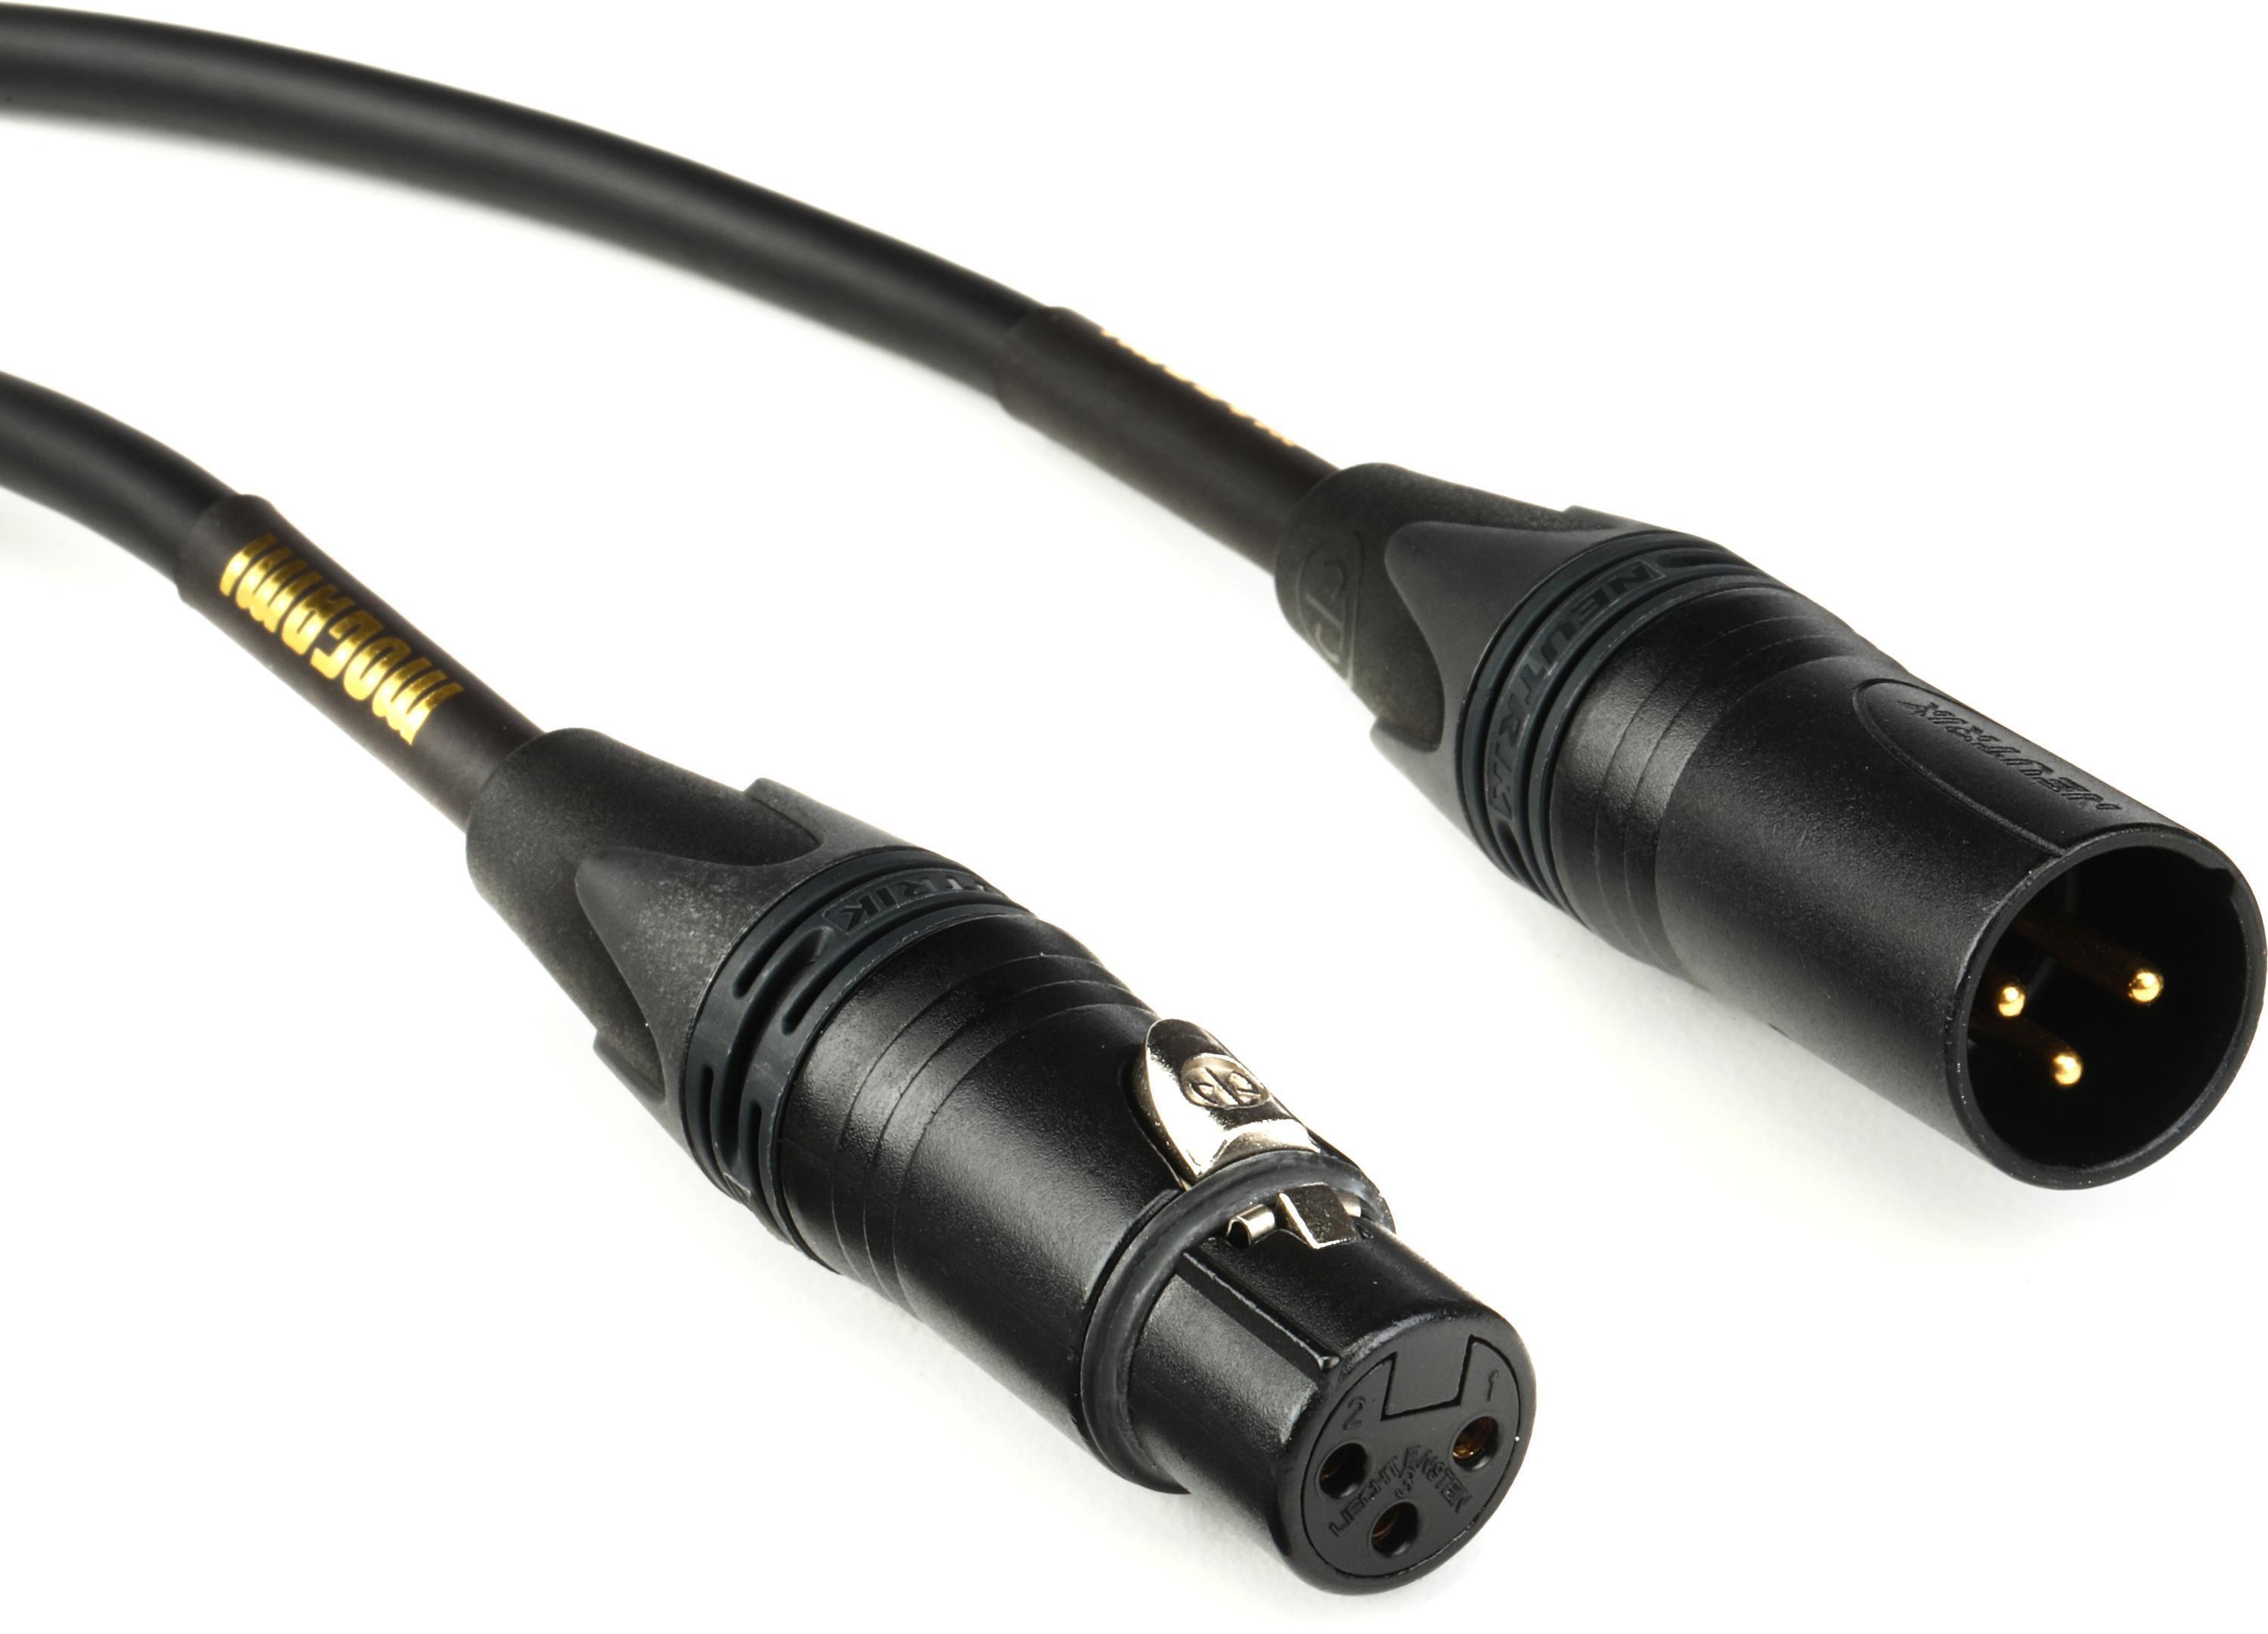 Mogami Gold Studio Microphone Cable - 15 foot